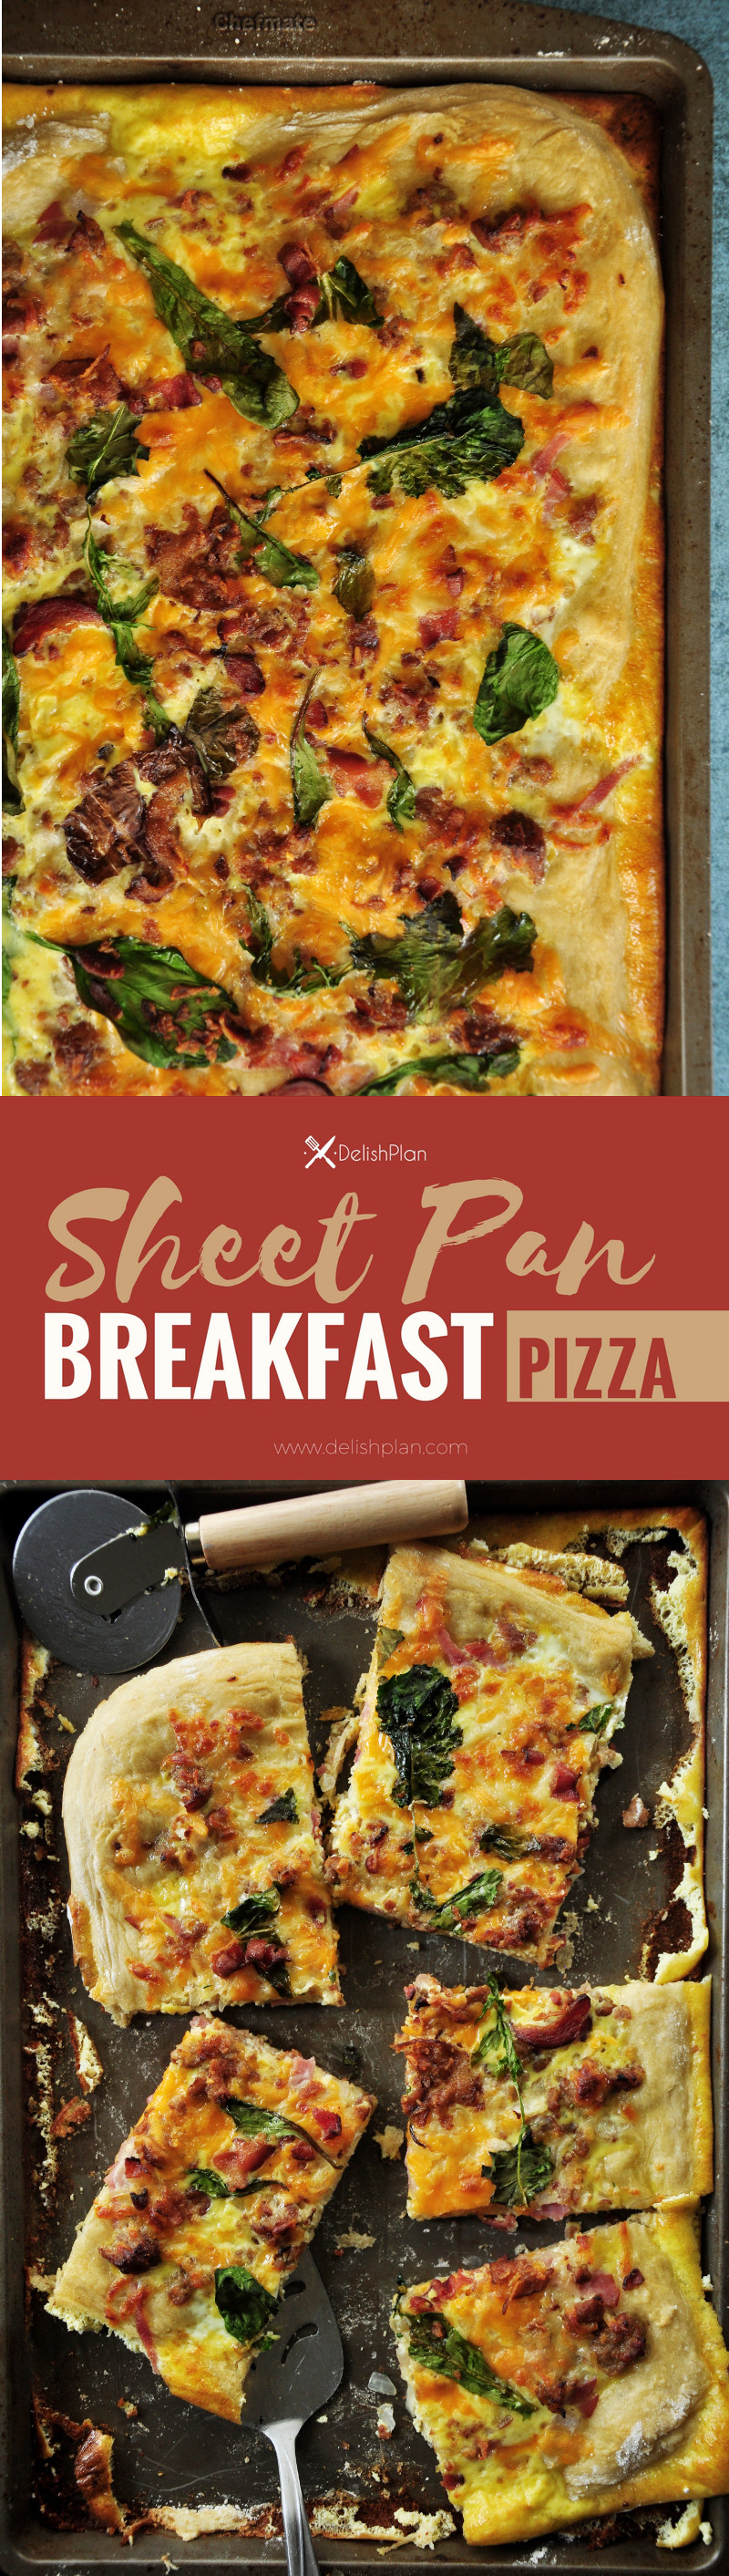 Sheet pan breakfast pizza recipe incorporates your favorite breakfast ingredients like bacon and eggs, plus onions and greens for a balanced one-pan meal.